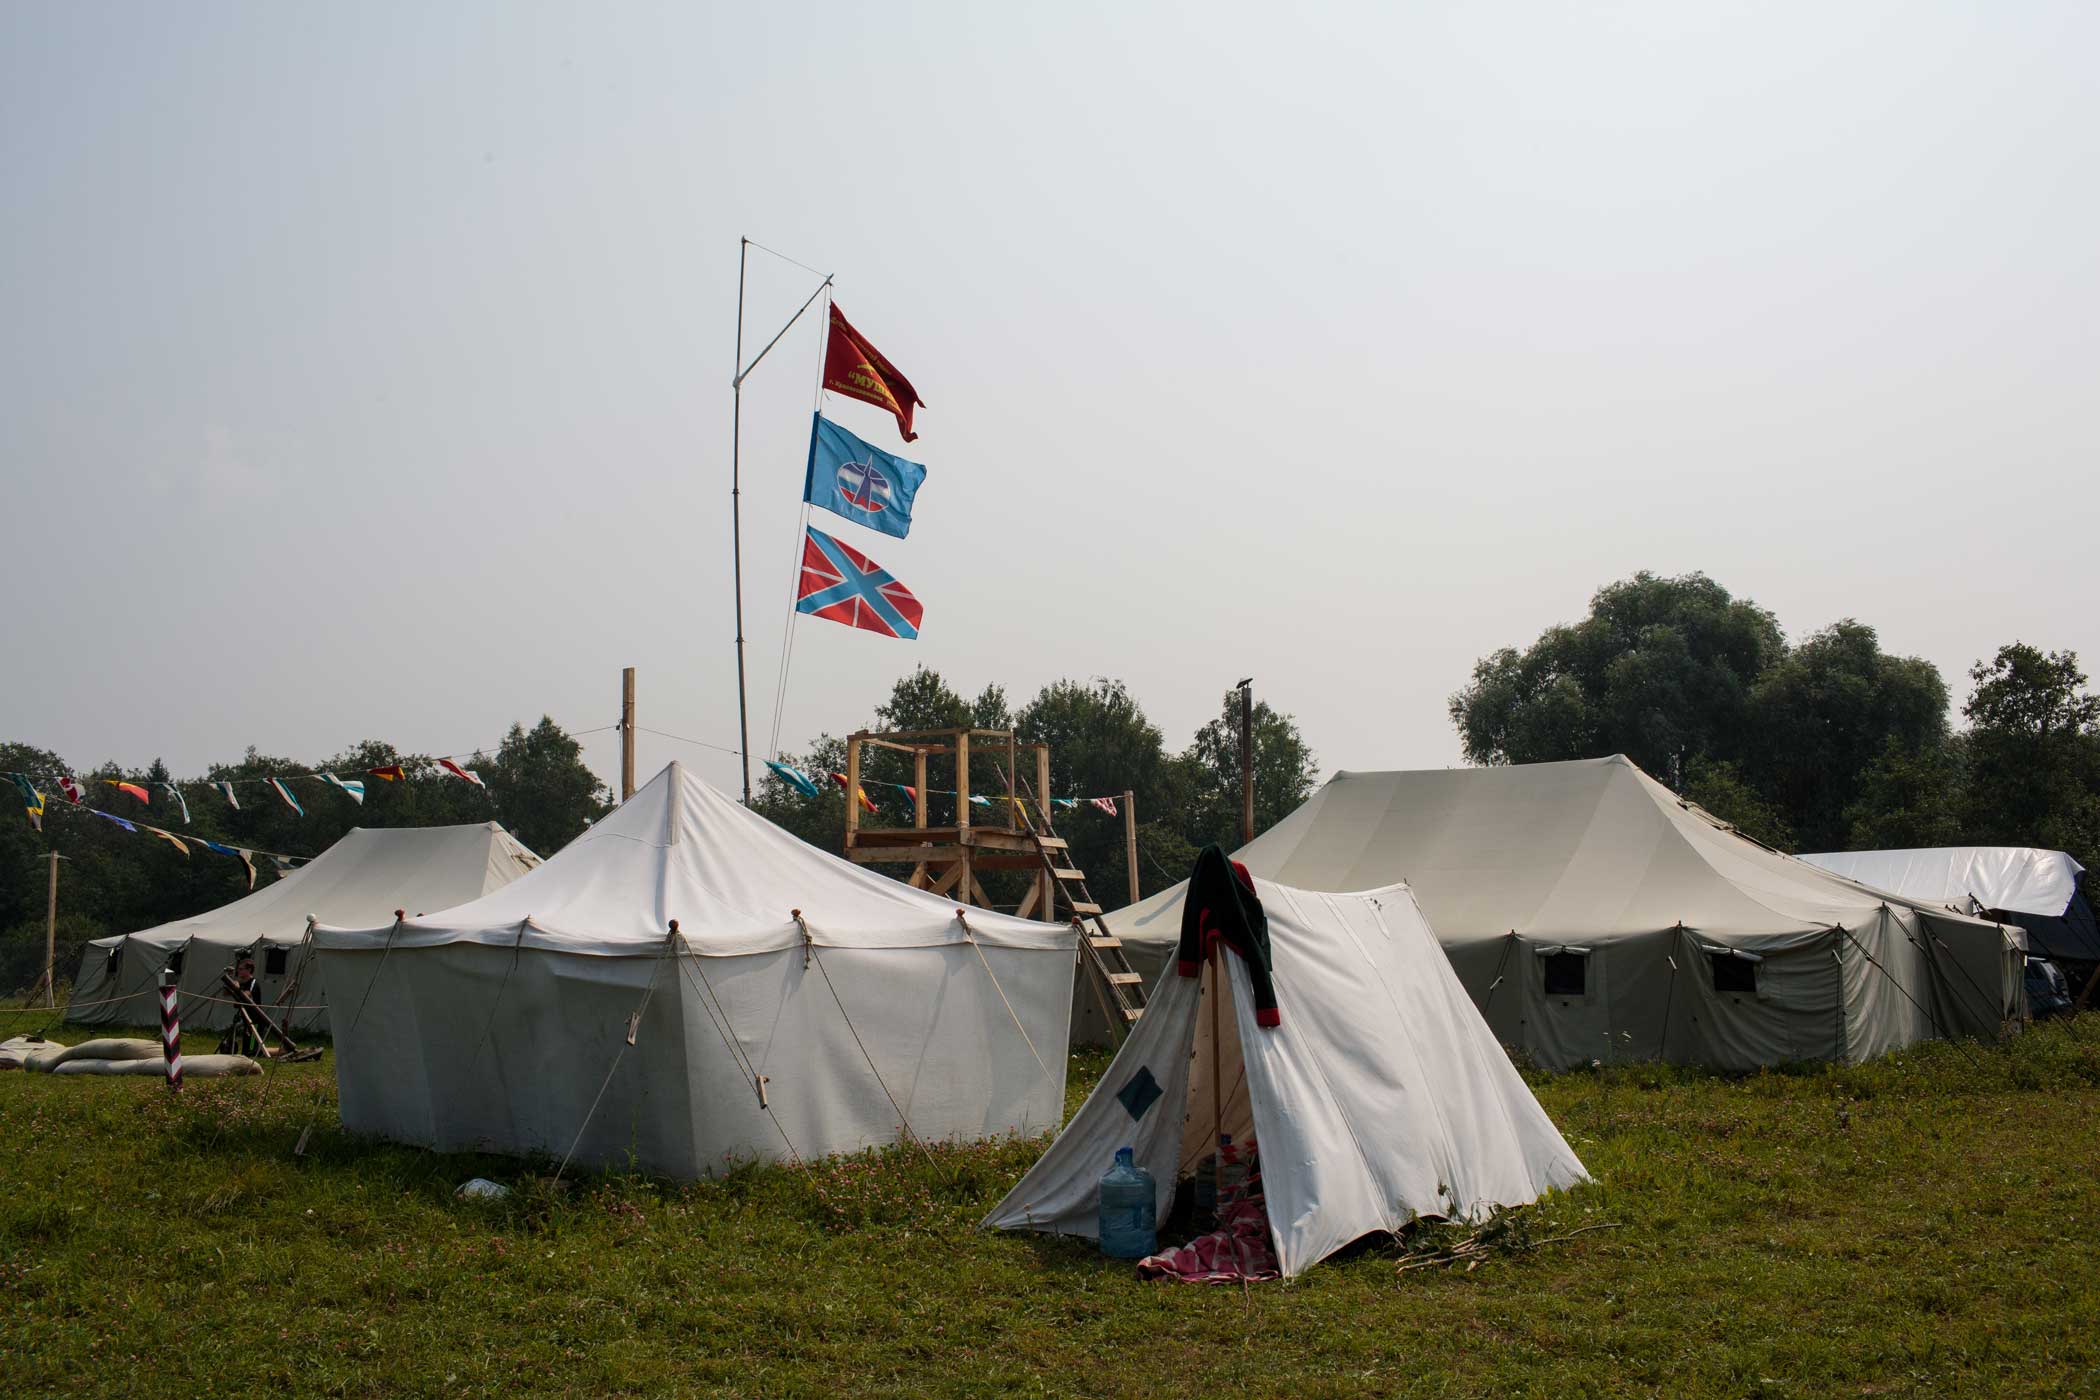 Военно-Исторический Лагерь Бородино 2016, the Historical-War Camp, in Borodino, Russia. 24 July 2016. Borodino is famous for a battle fought on 7 Sep 1812 - the deadliest day of the Napoleonic Wars. 350 adolescents are in attendance, ranging in ages from 11 to 17, and lasts throughout the summer. Students learn a variety of skills from tactical training in handguns, loading and unloading automatic guns, physical endurance, knife throwing, and others. The project statement of the camp says: "To awaken in the younger generation a keen interest in the history of the Fatherland, the glorious deeds of our ancestors, to facilitate the expansion of military-historical knowledge."